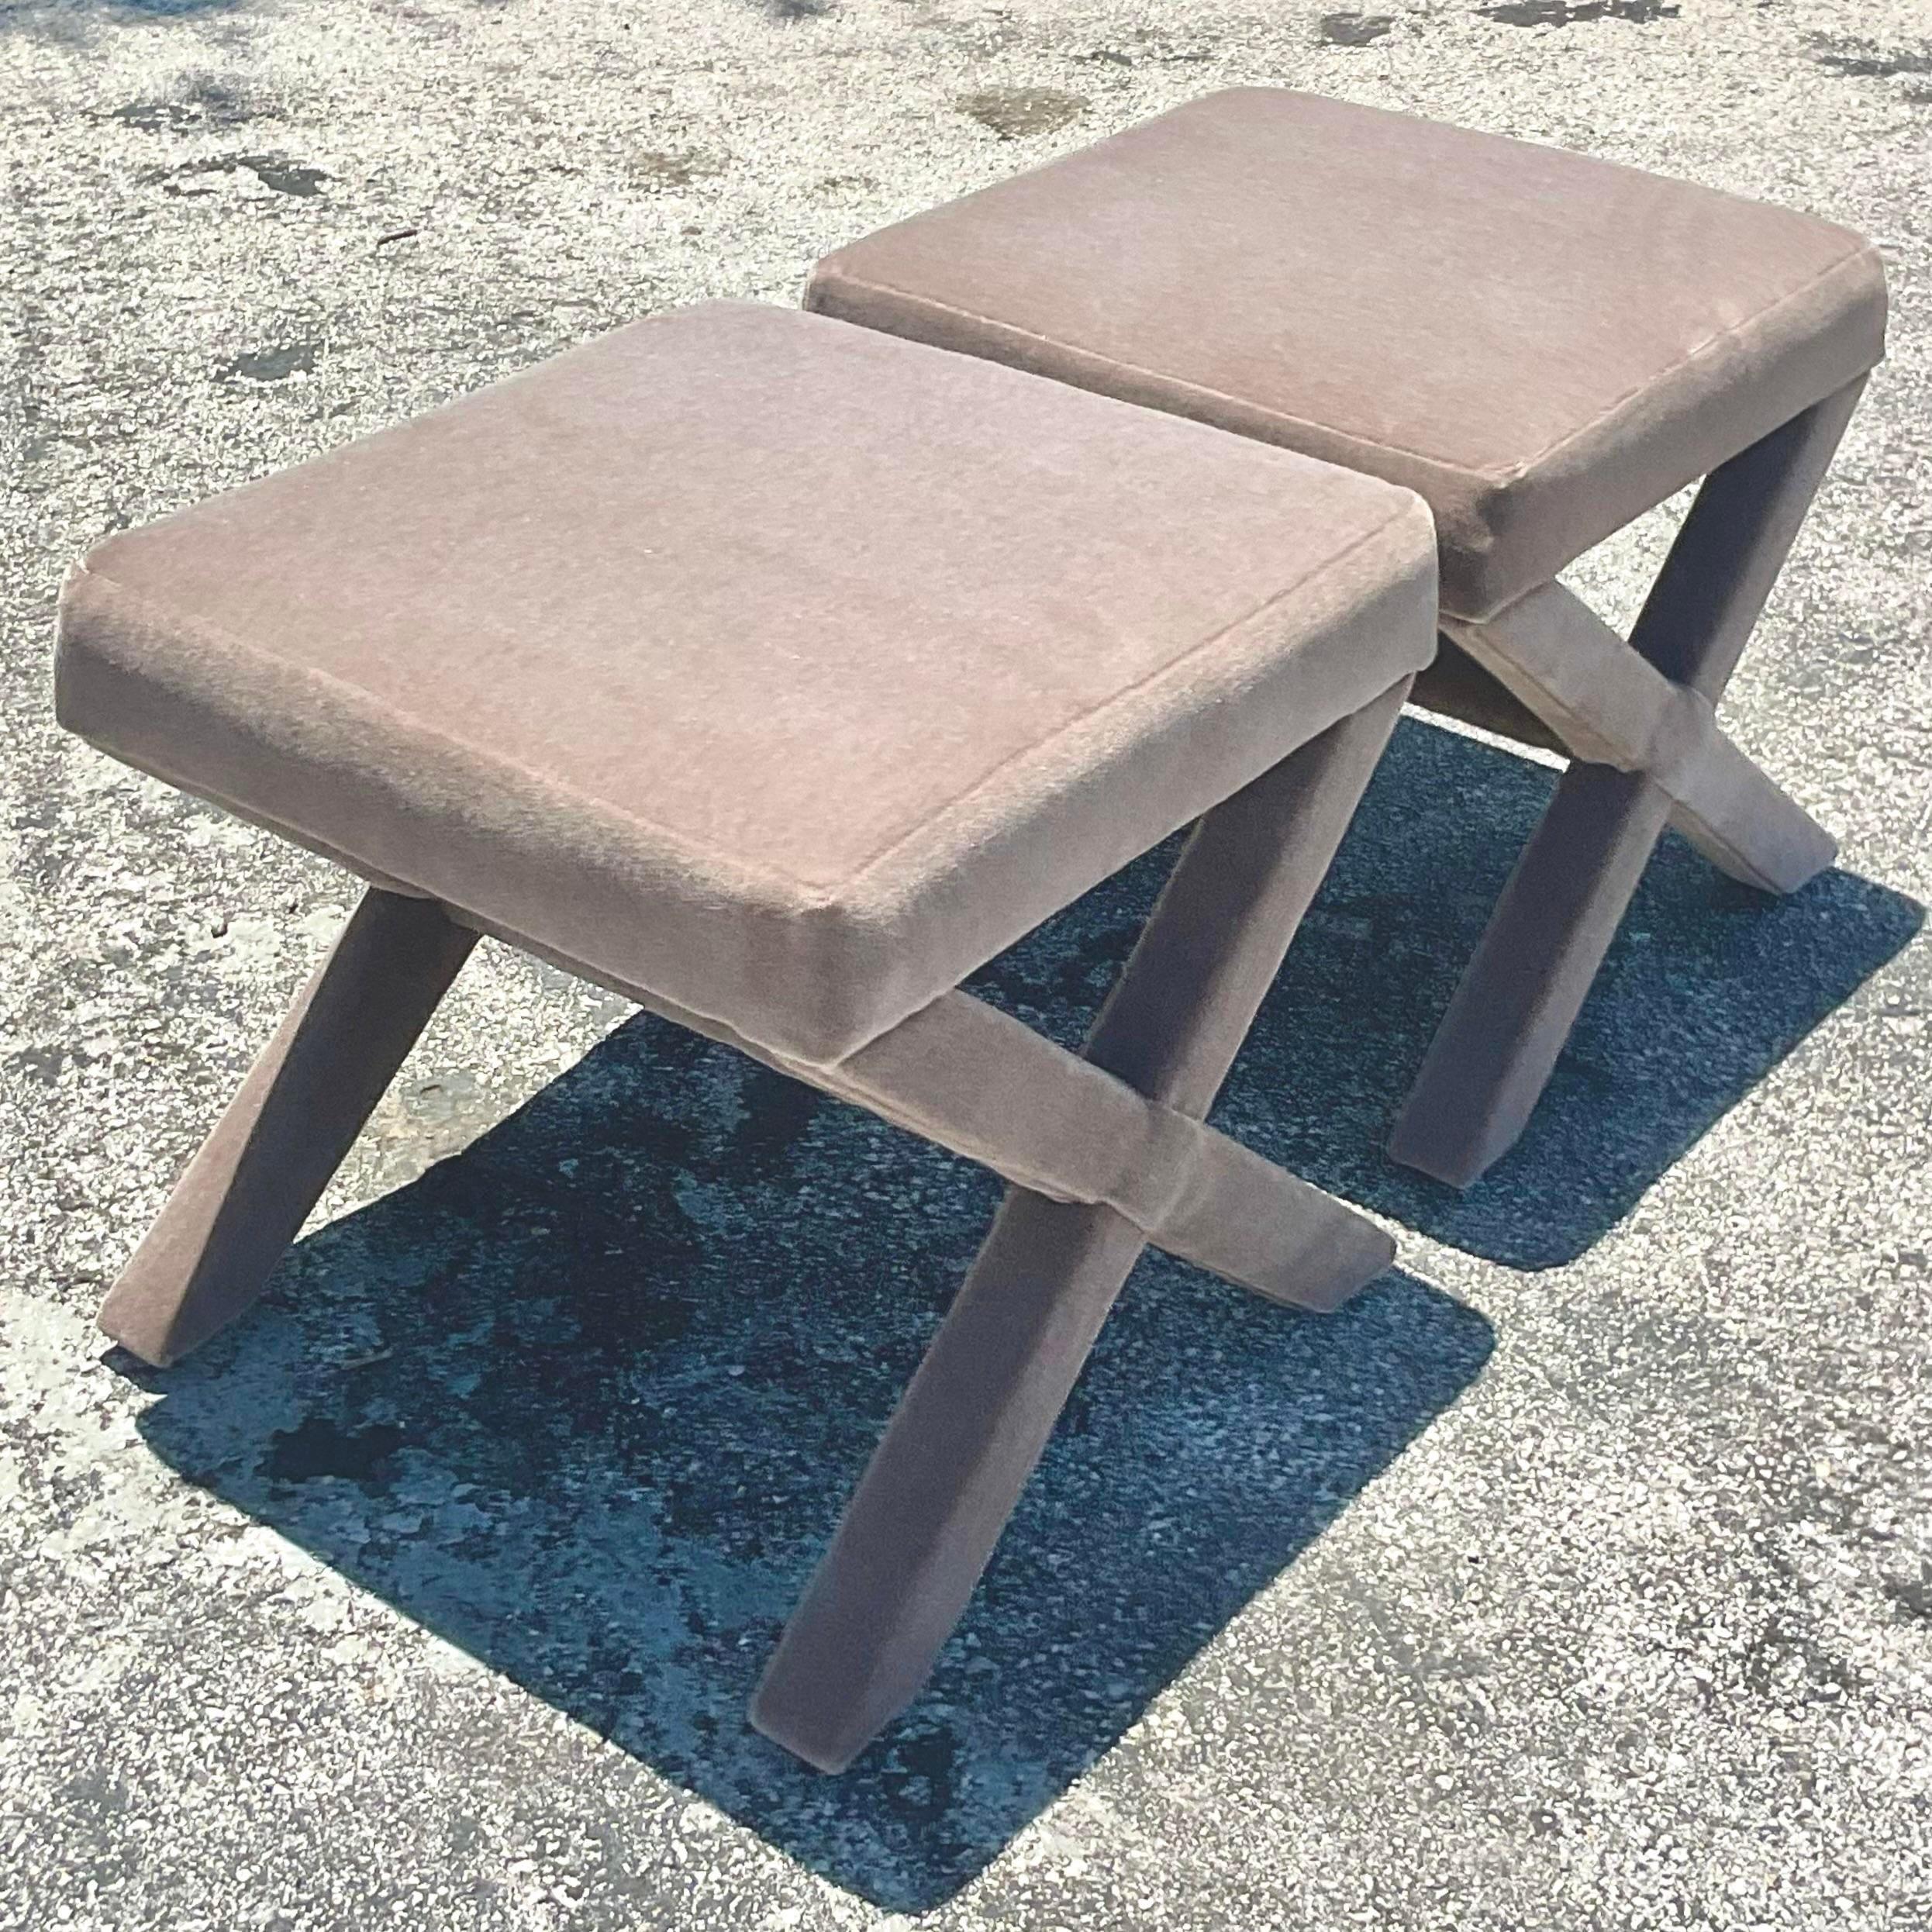 A fabulous pair of vintage Contemporary X Benches. A chic Taupe colored mohair in a sleek and clean shape. Acquired from a Palm Beach estate.